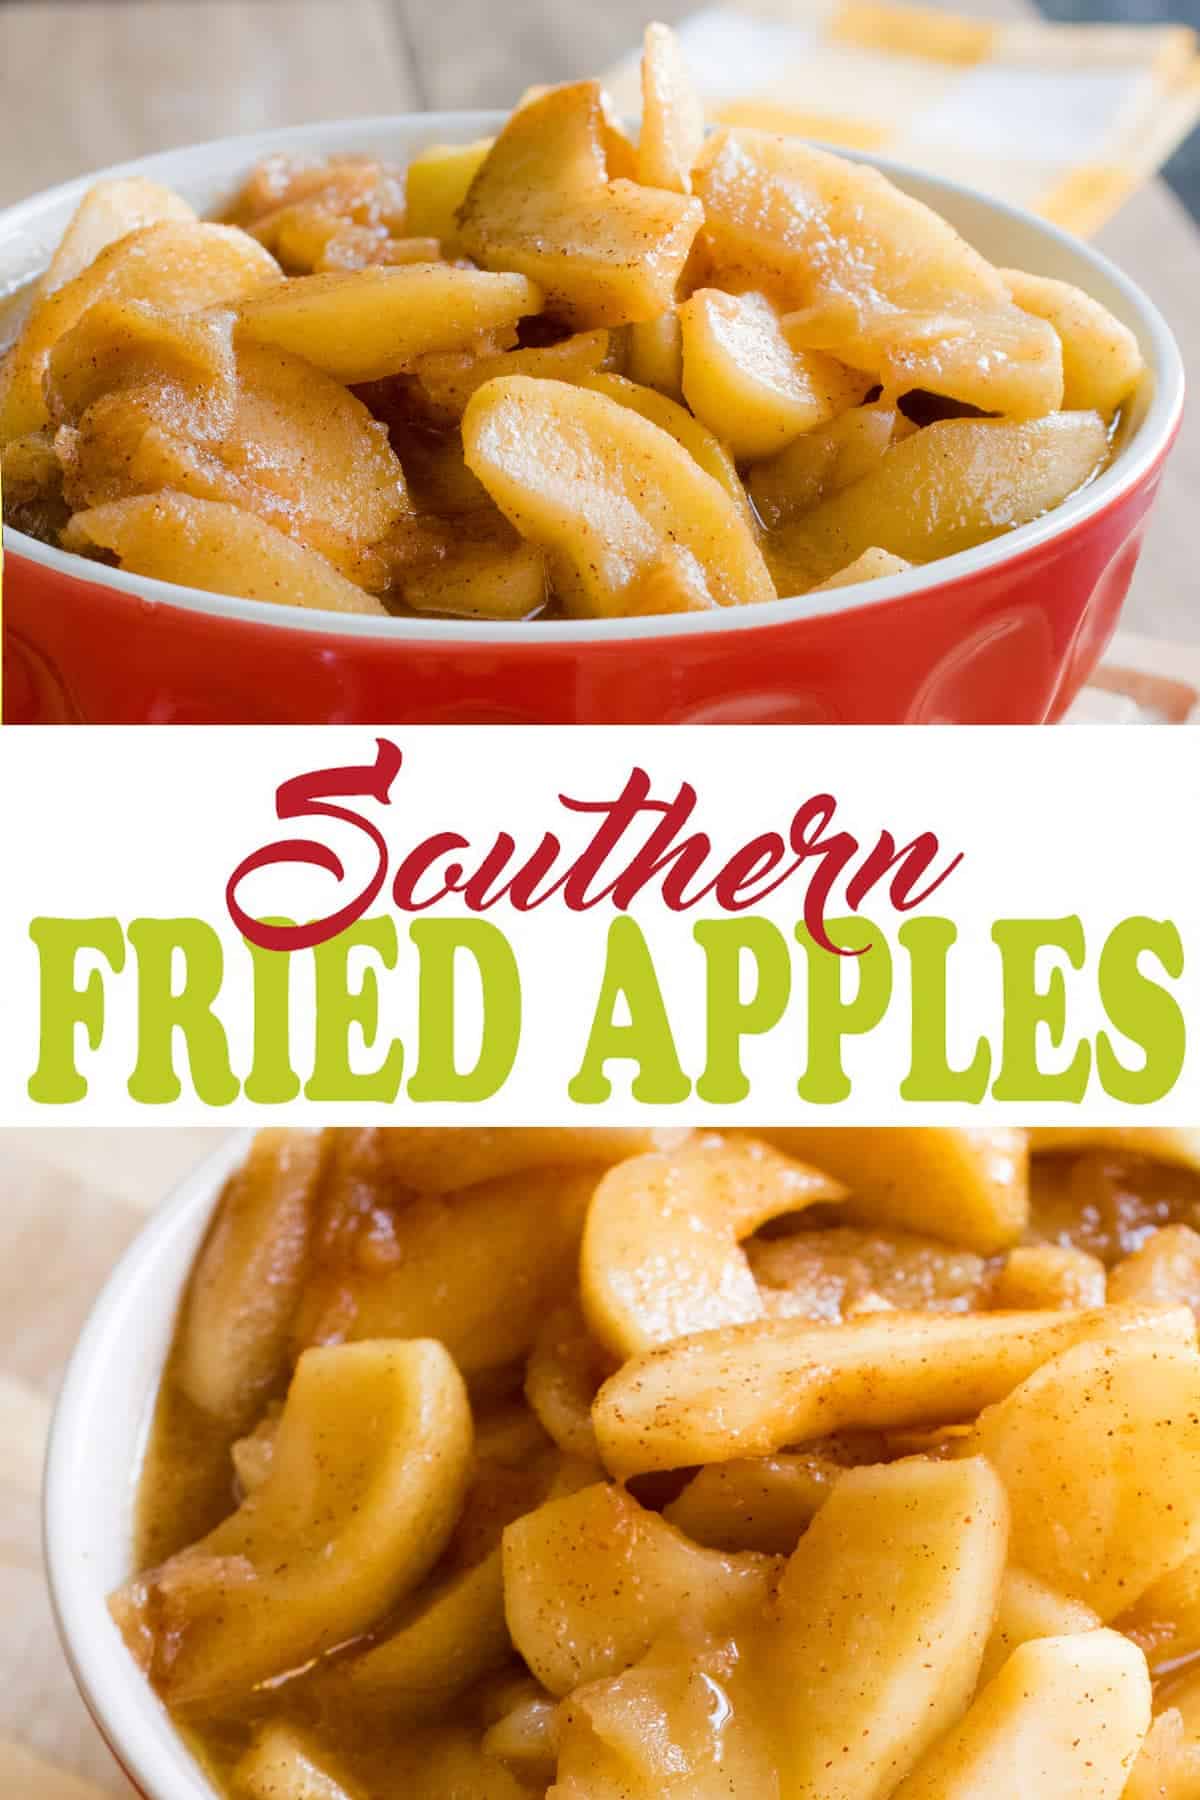 Southern Fried Apples with Cinnamon in red bowl with post title.